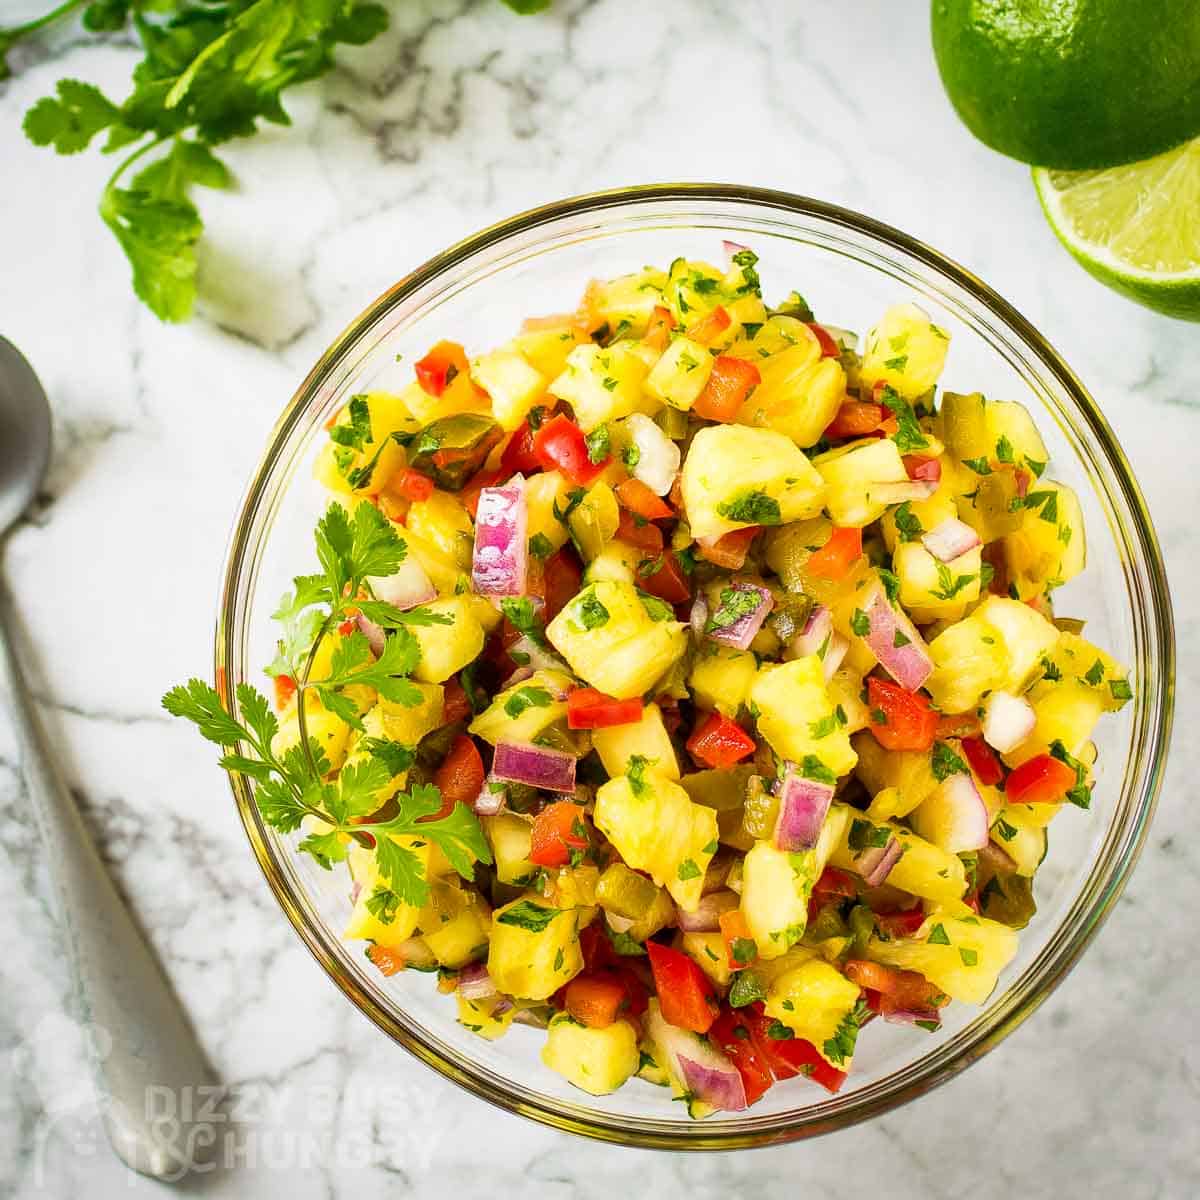 Overhead shot of pineapple salsa garnished with cilantro in a clear bowl on a white surface with more herbs and halved limes in the background.